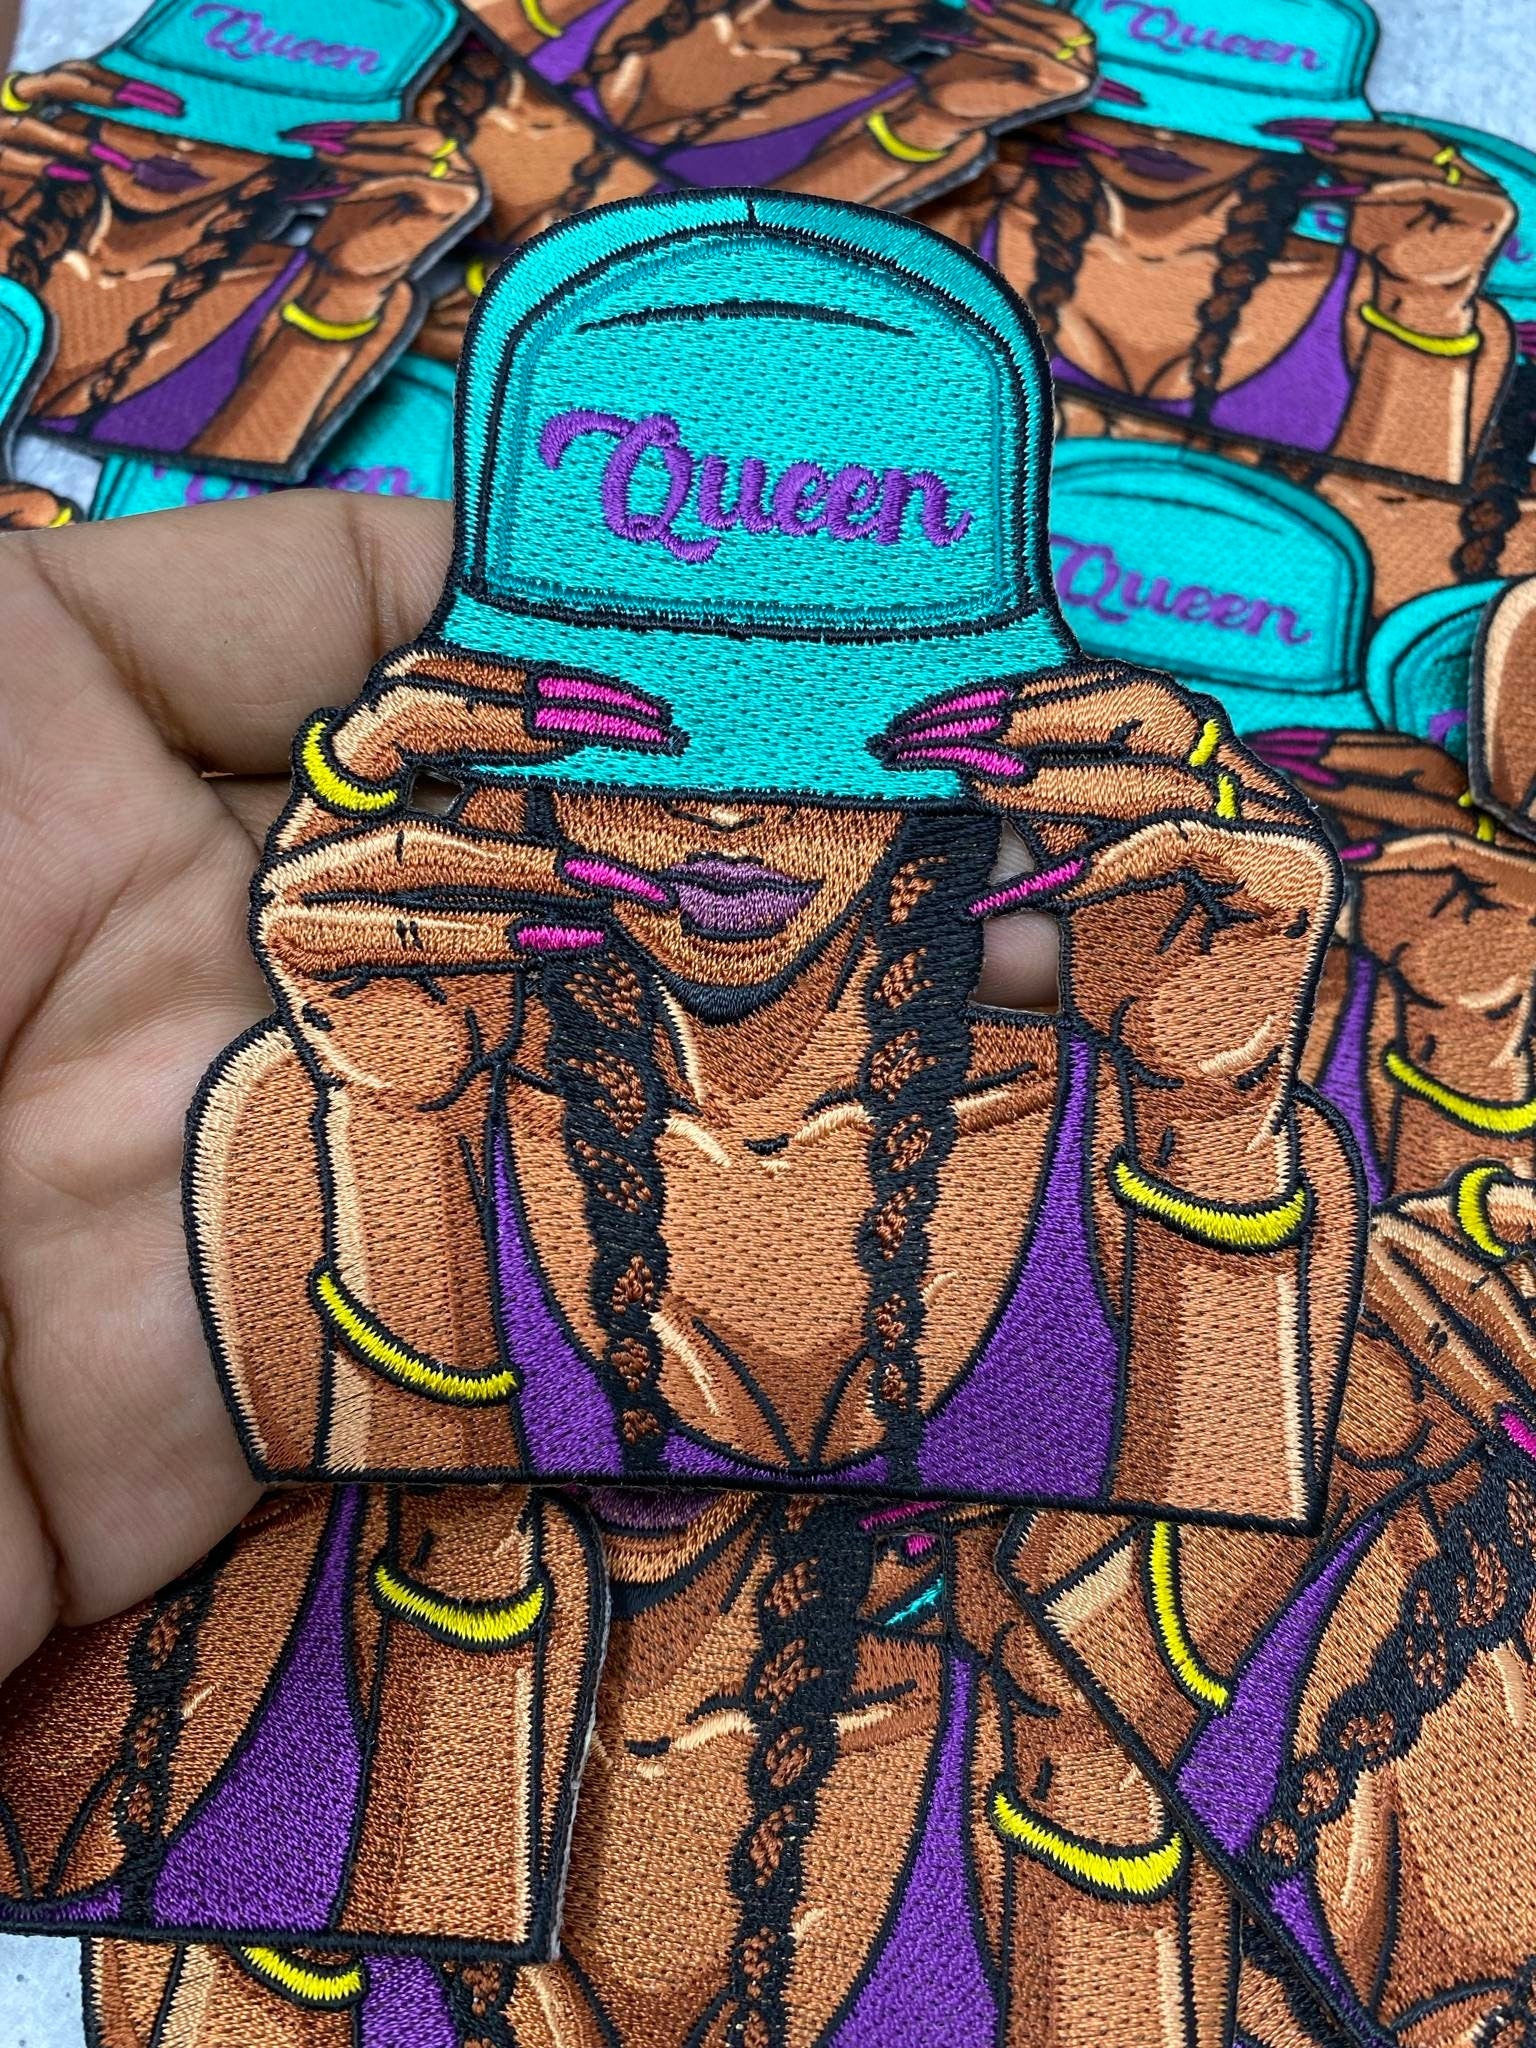 New Arrival, Turquoise Hat "Queen" Iron-on Patch, Embroidered Afrocentric Patch| Beautiful Black Queen|Jacket Patch|DIY Applique| Size 4"